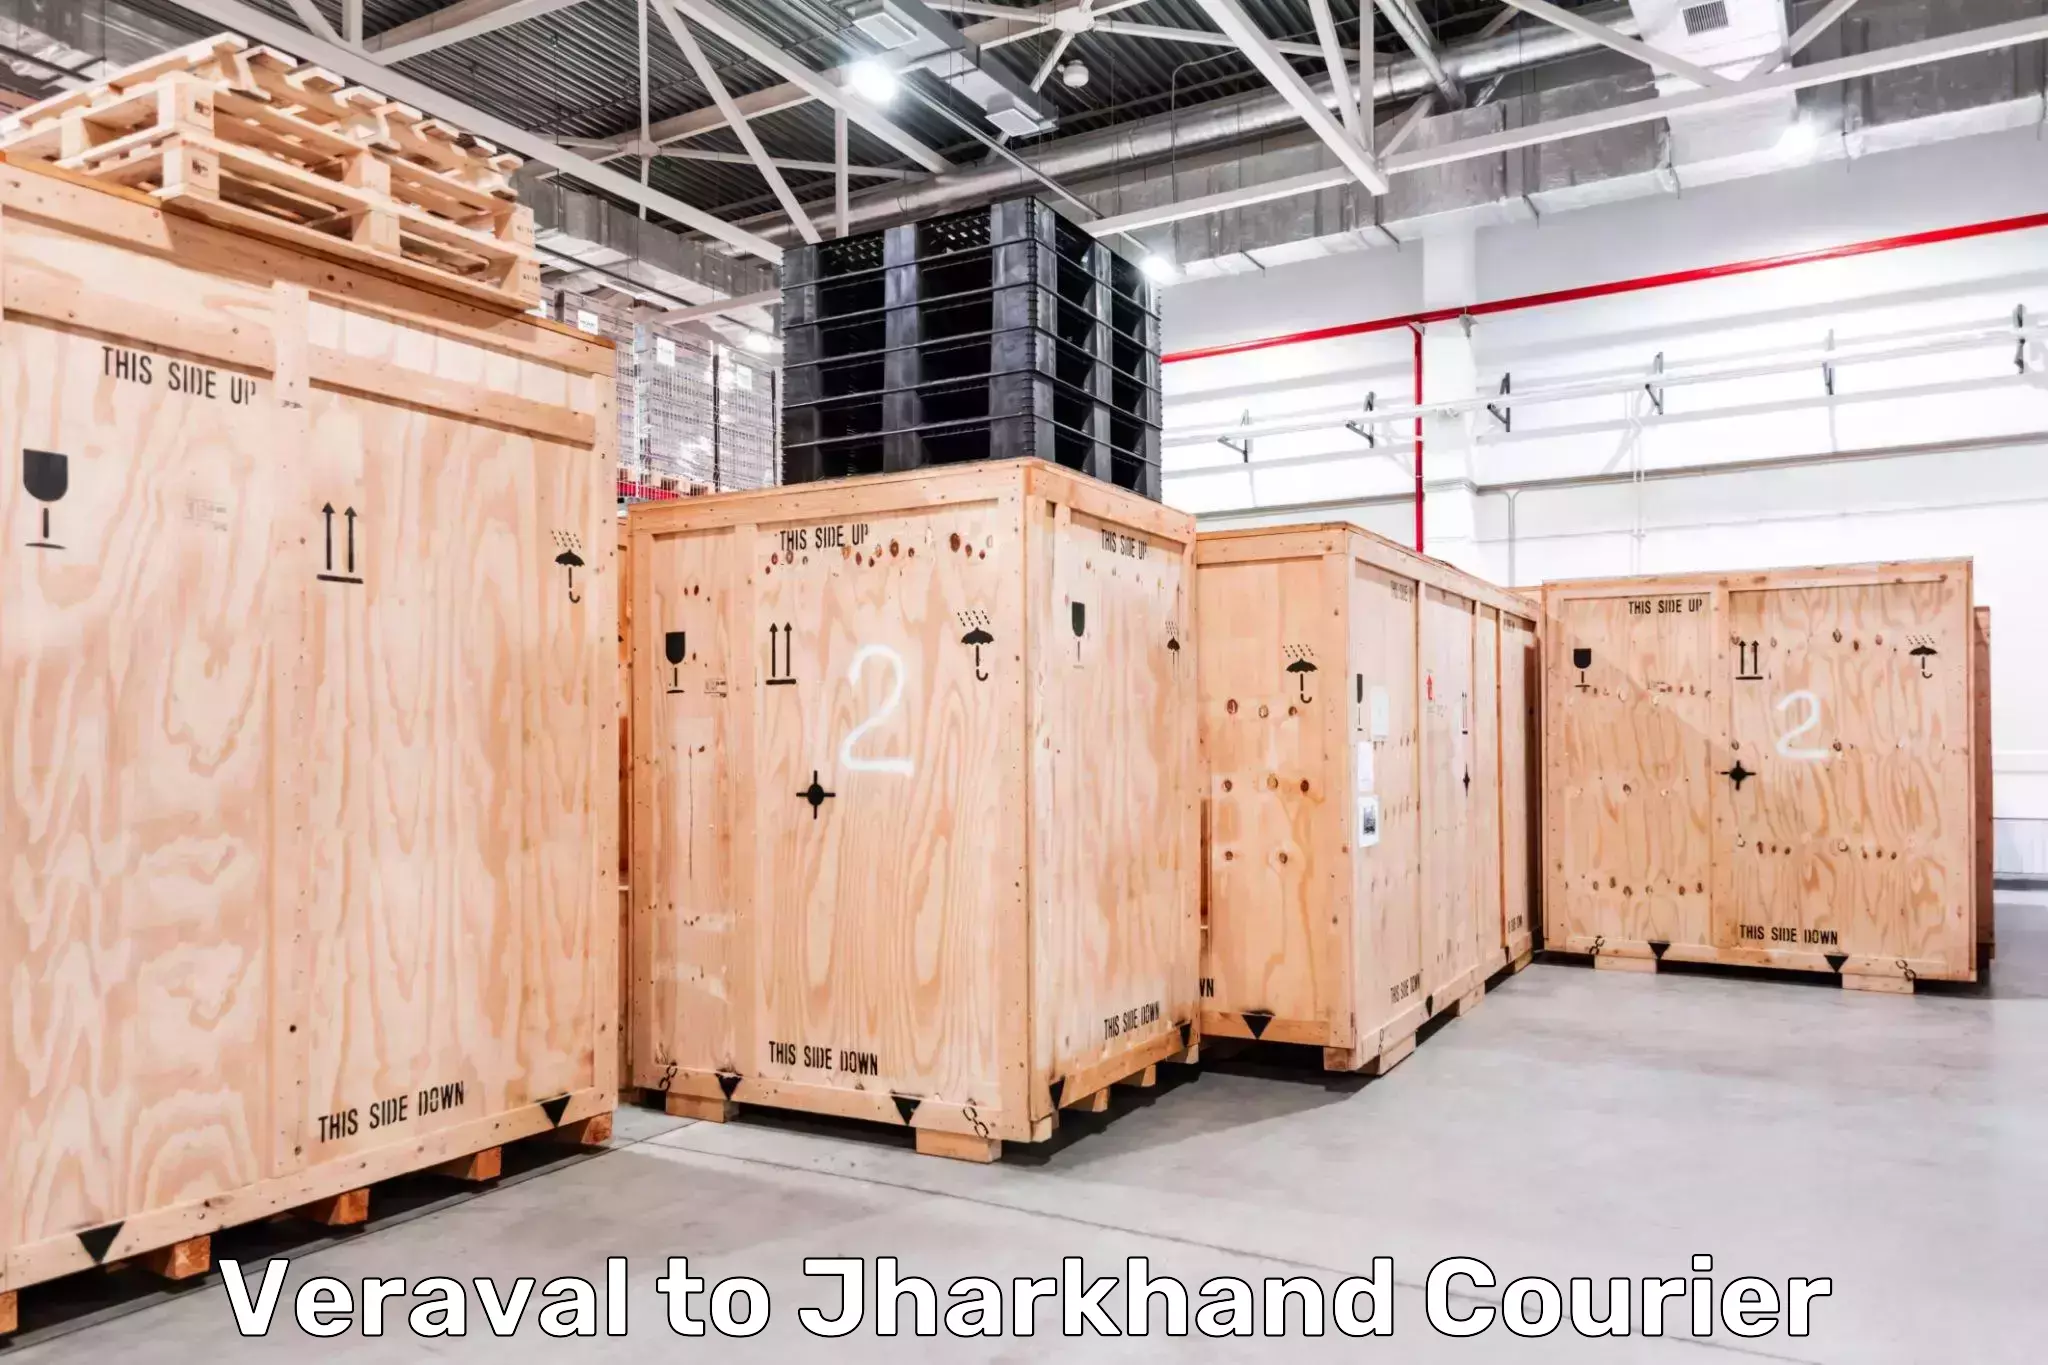 Nationwide shipping capabilities Veraval to Isri